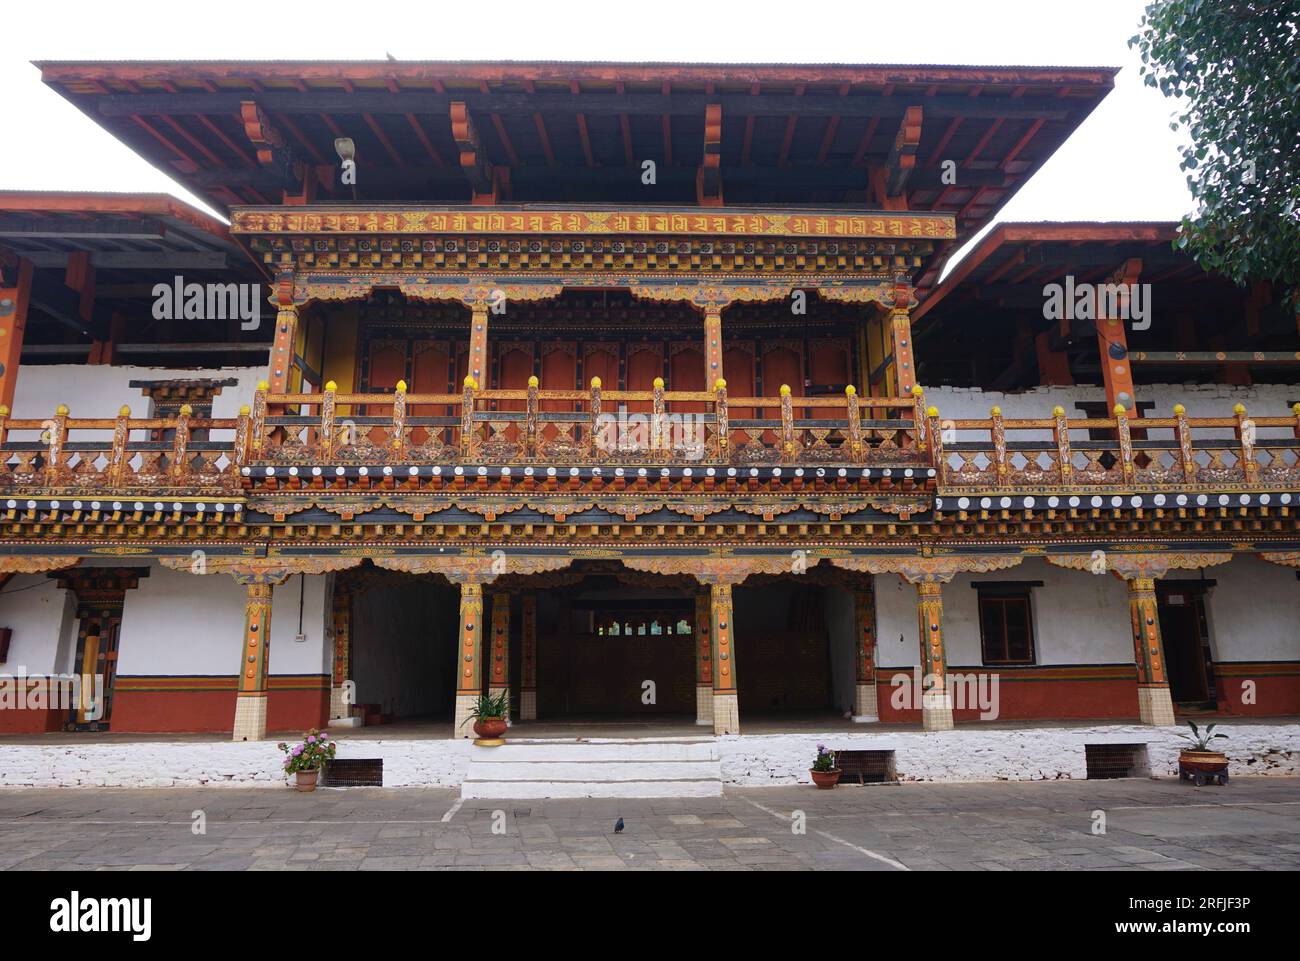 Colorful historic wooden architecture inside Punakha Dzong in Bhutan. A balcony with square overhanging roof sits atop a row of carved painted pillars Stock Photo